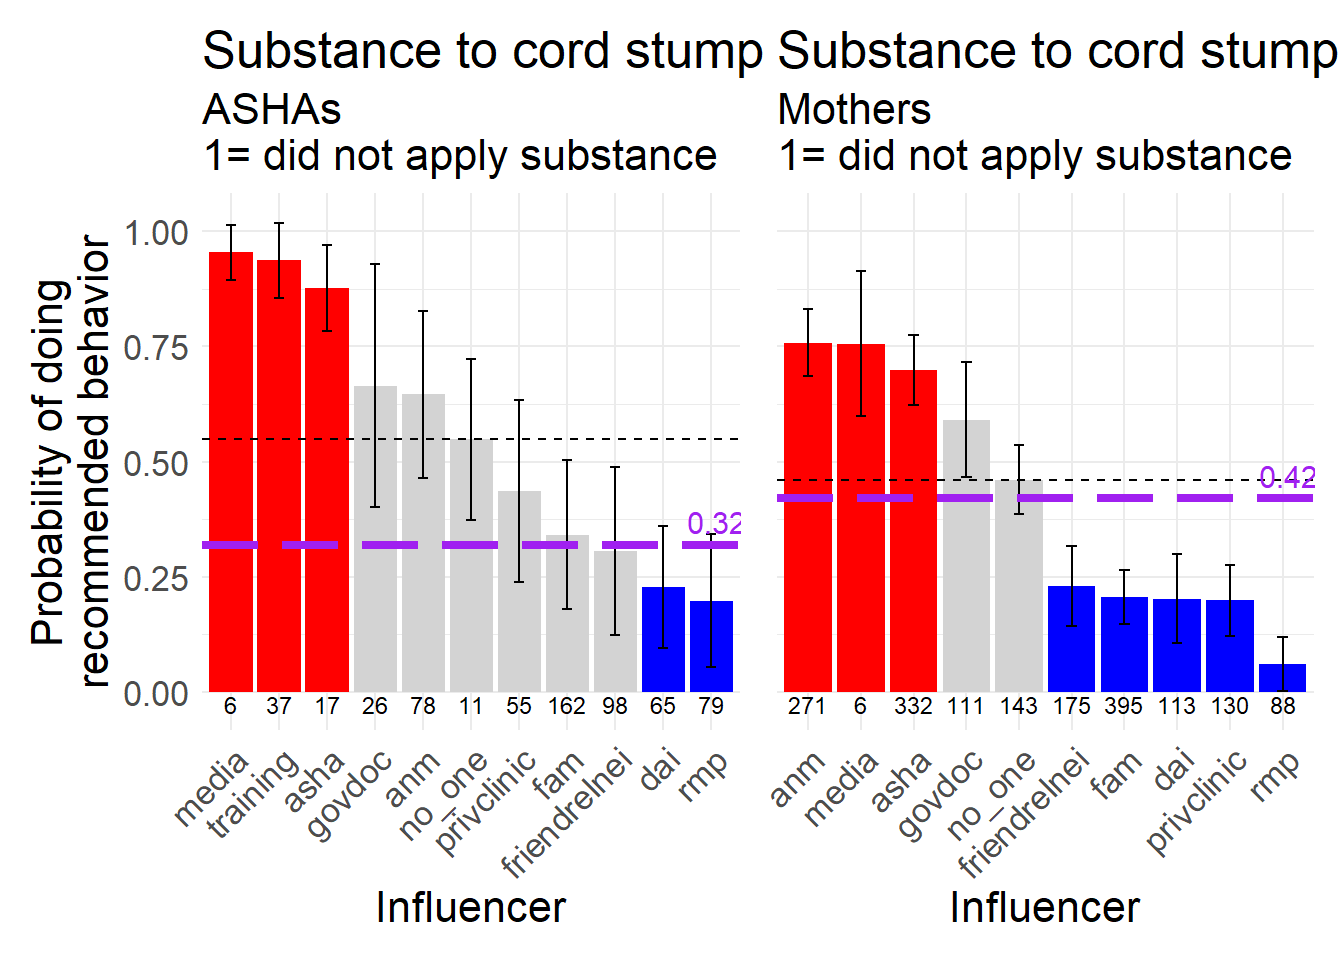 Applying a substance to the umbilical cord stump, a behavior biomedically recommended not to do, 1 = did NOT apply a substance to the cordstump.